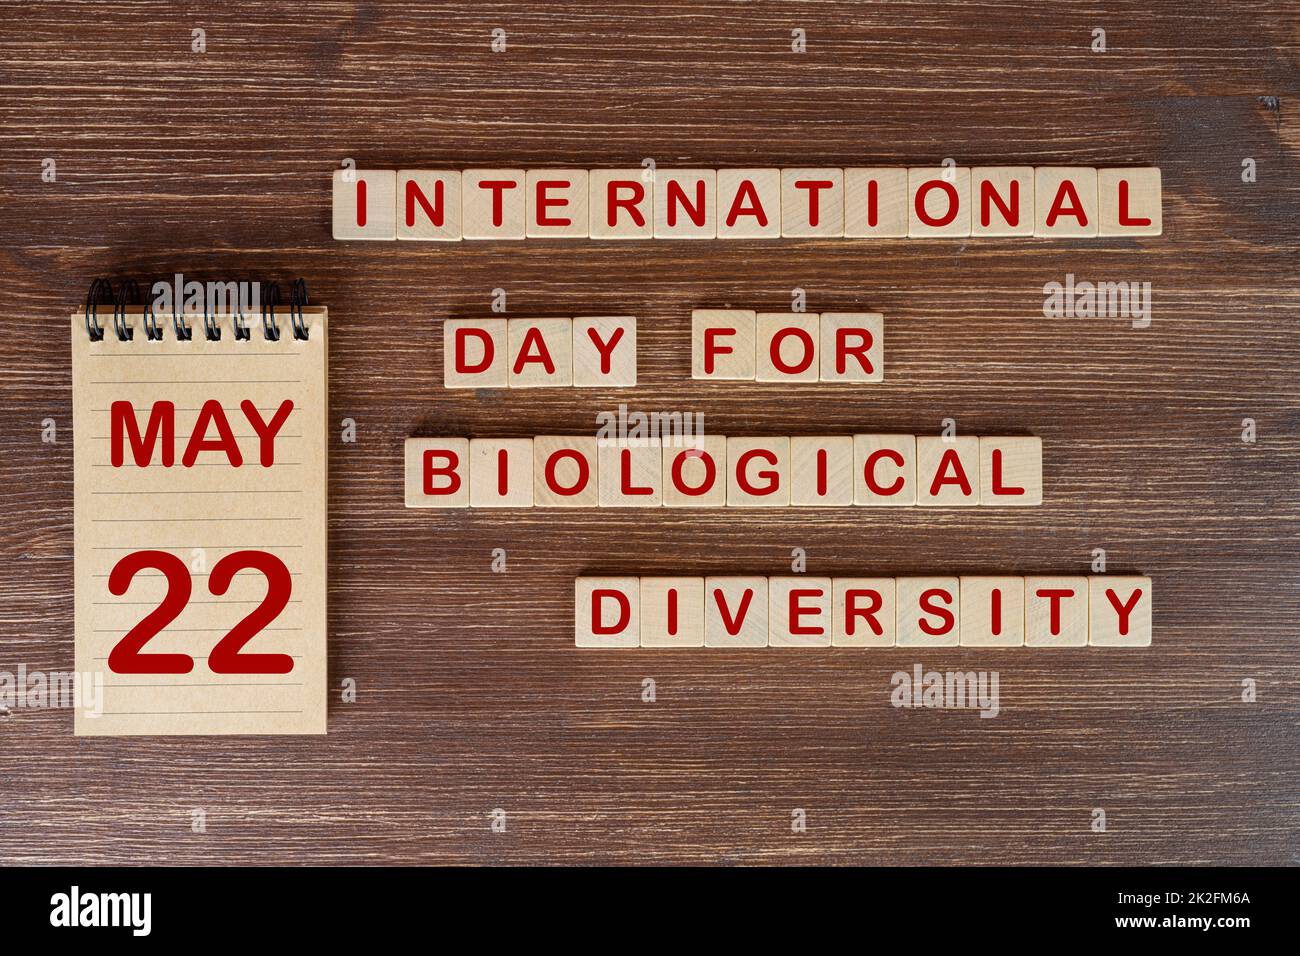 International Day for Biological Diversity Stock Photo